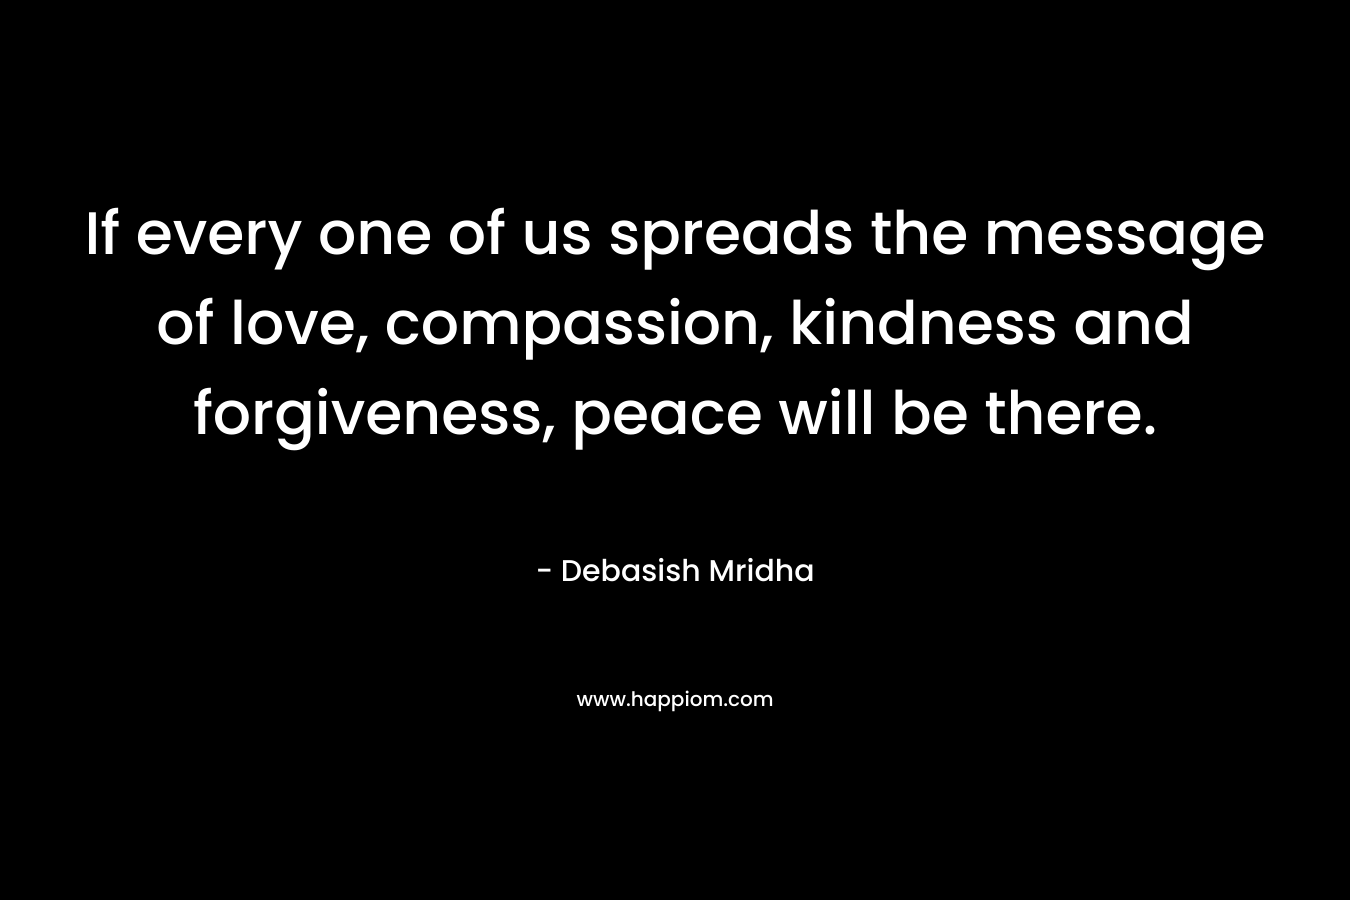 If every one of us spreads the message of love, compassion, kindness and forgiveness, peace will be there.